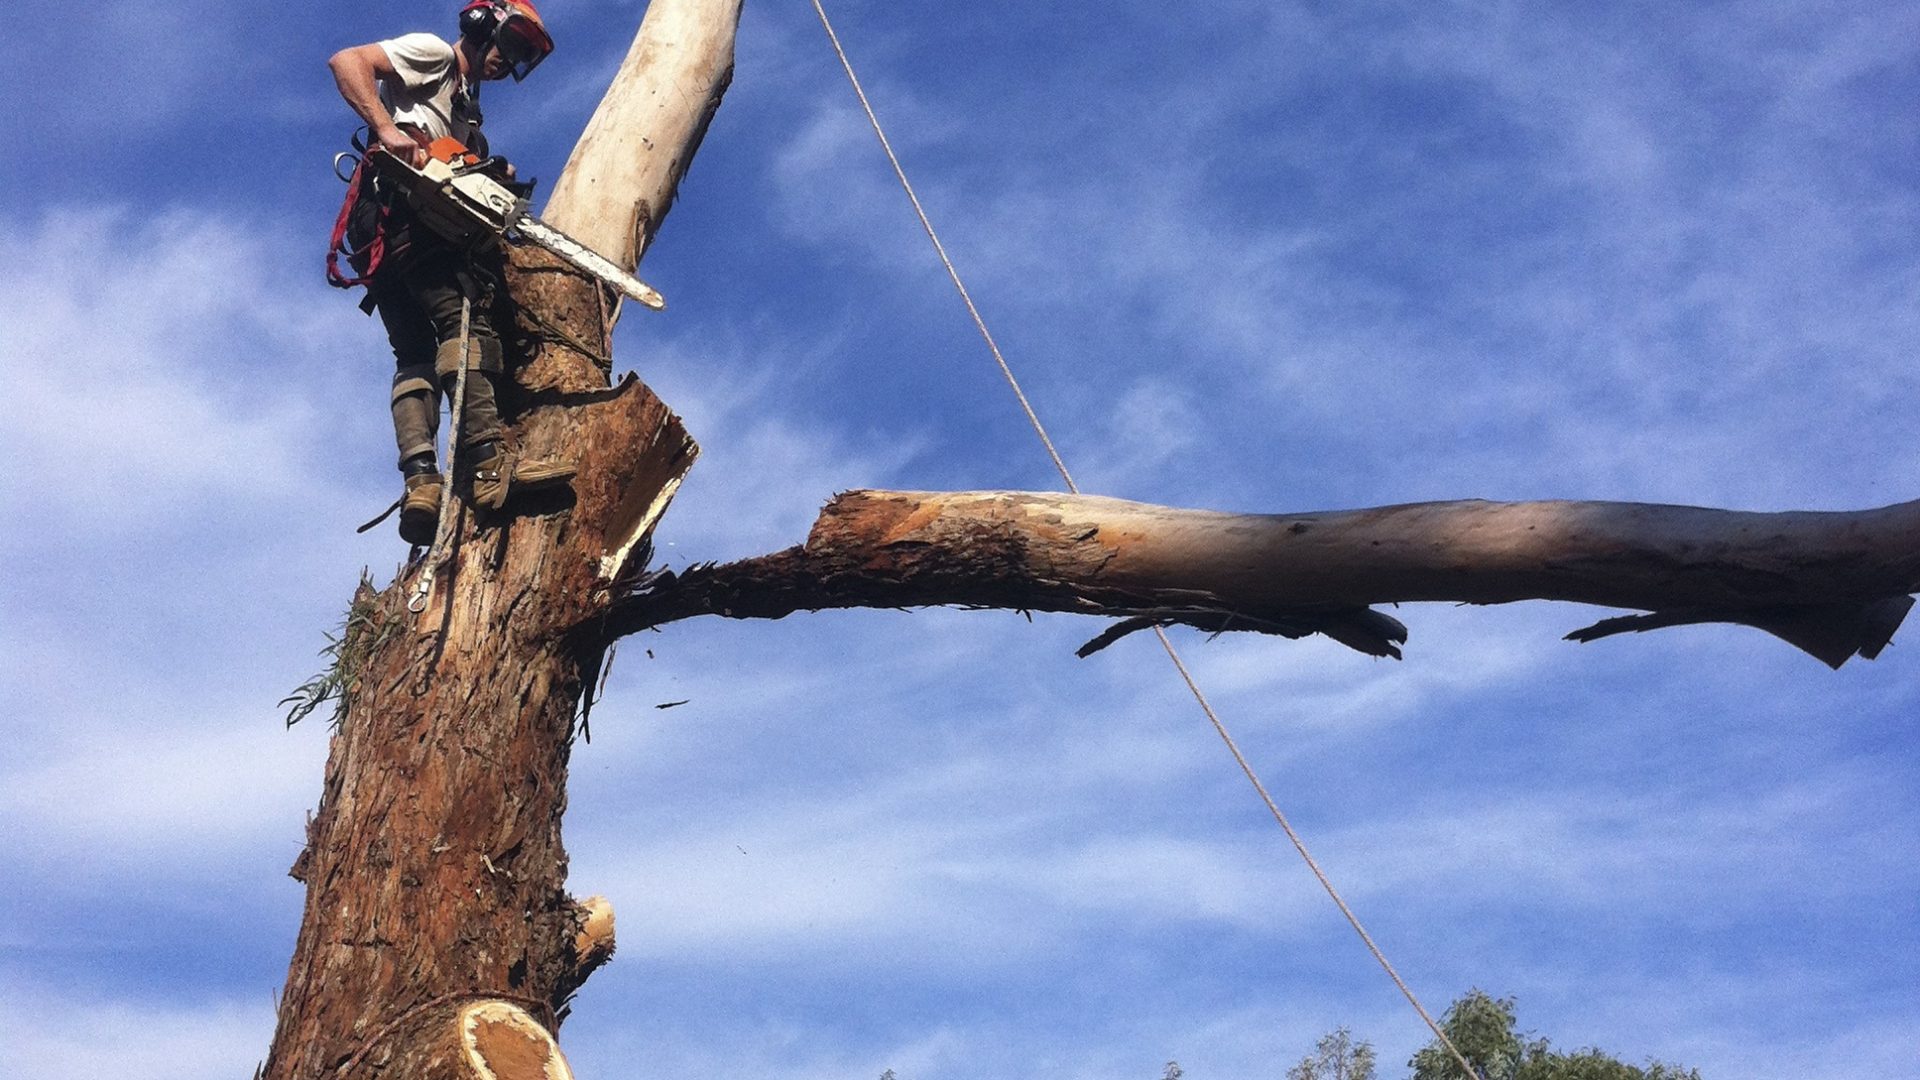 EDITHVALE TREE SERVICES include Pruning, Trimming, Removal and Felling